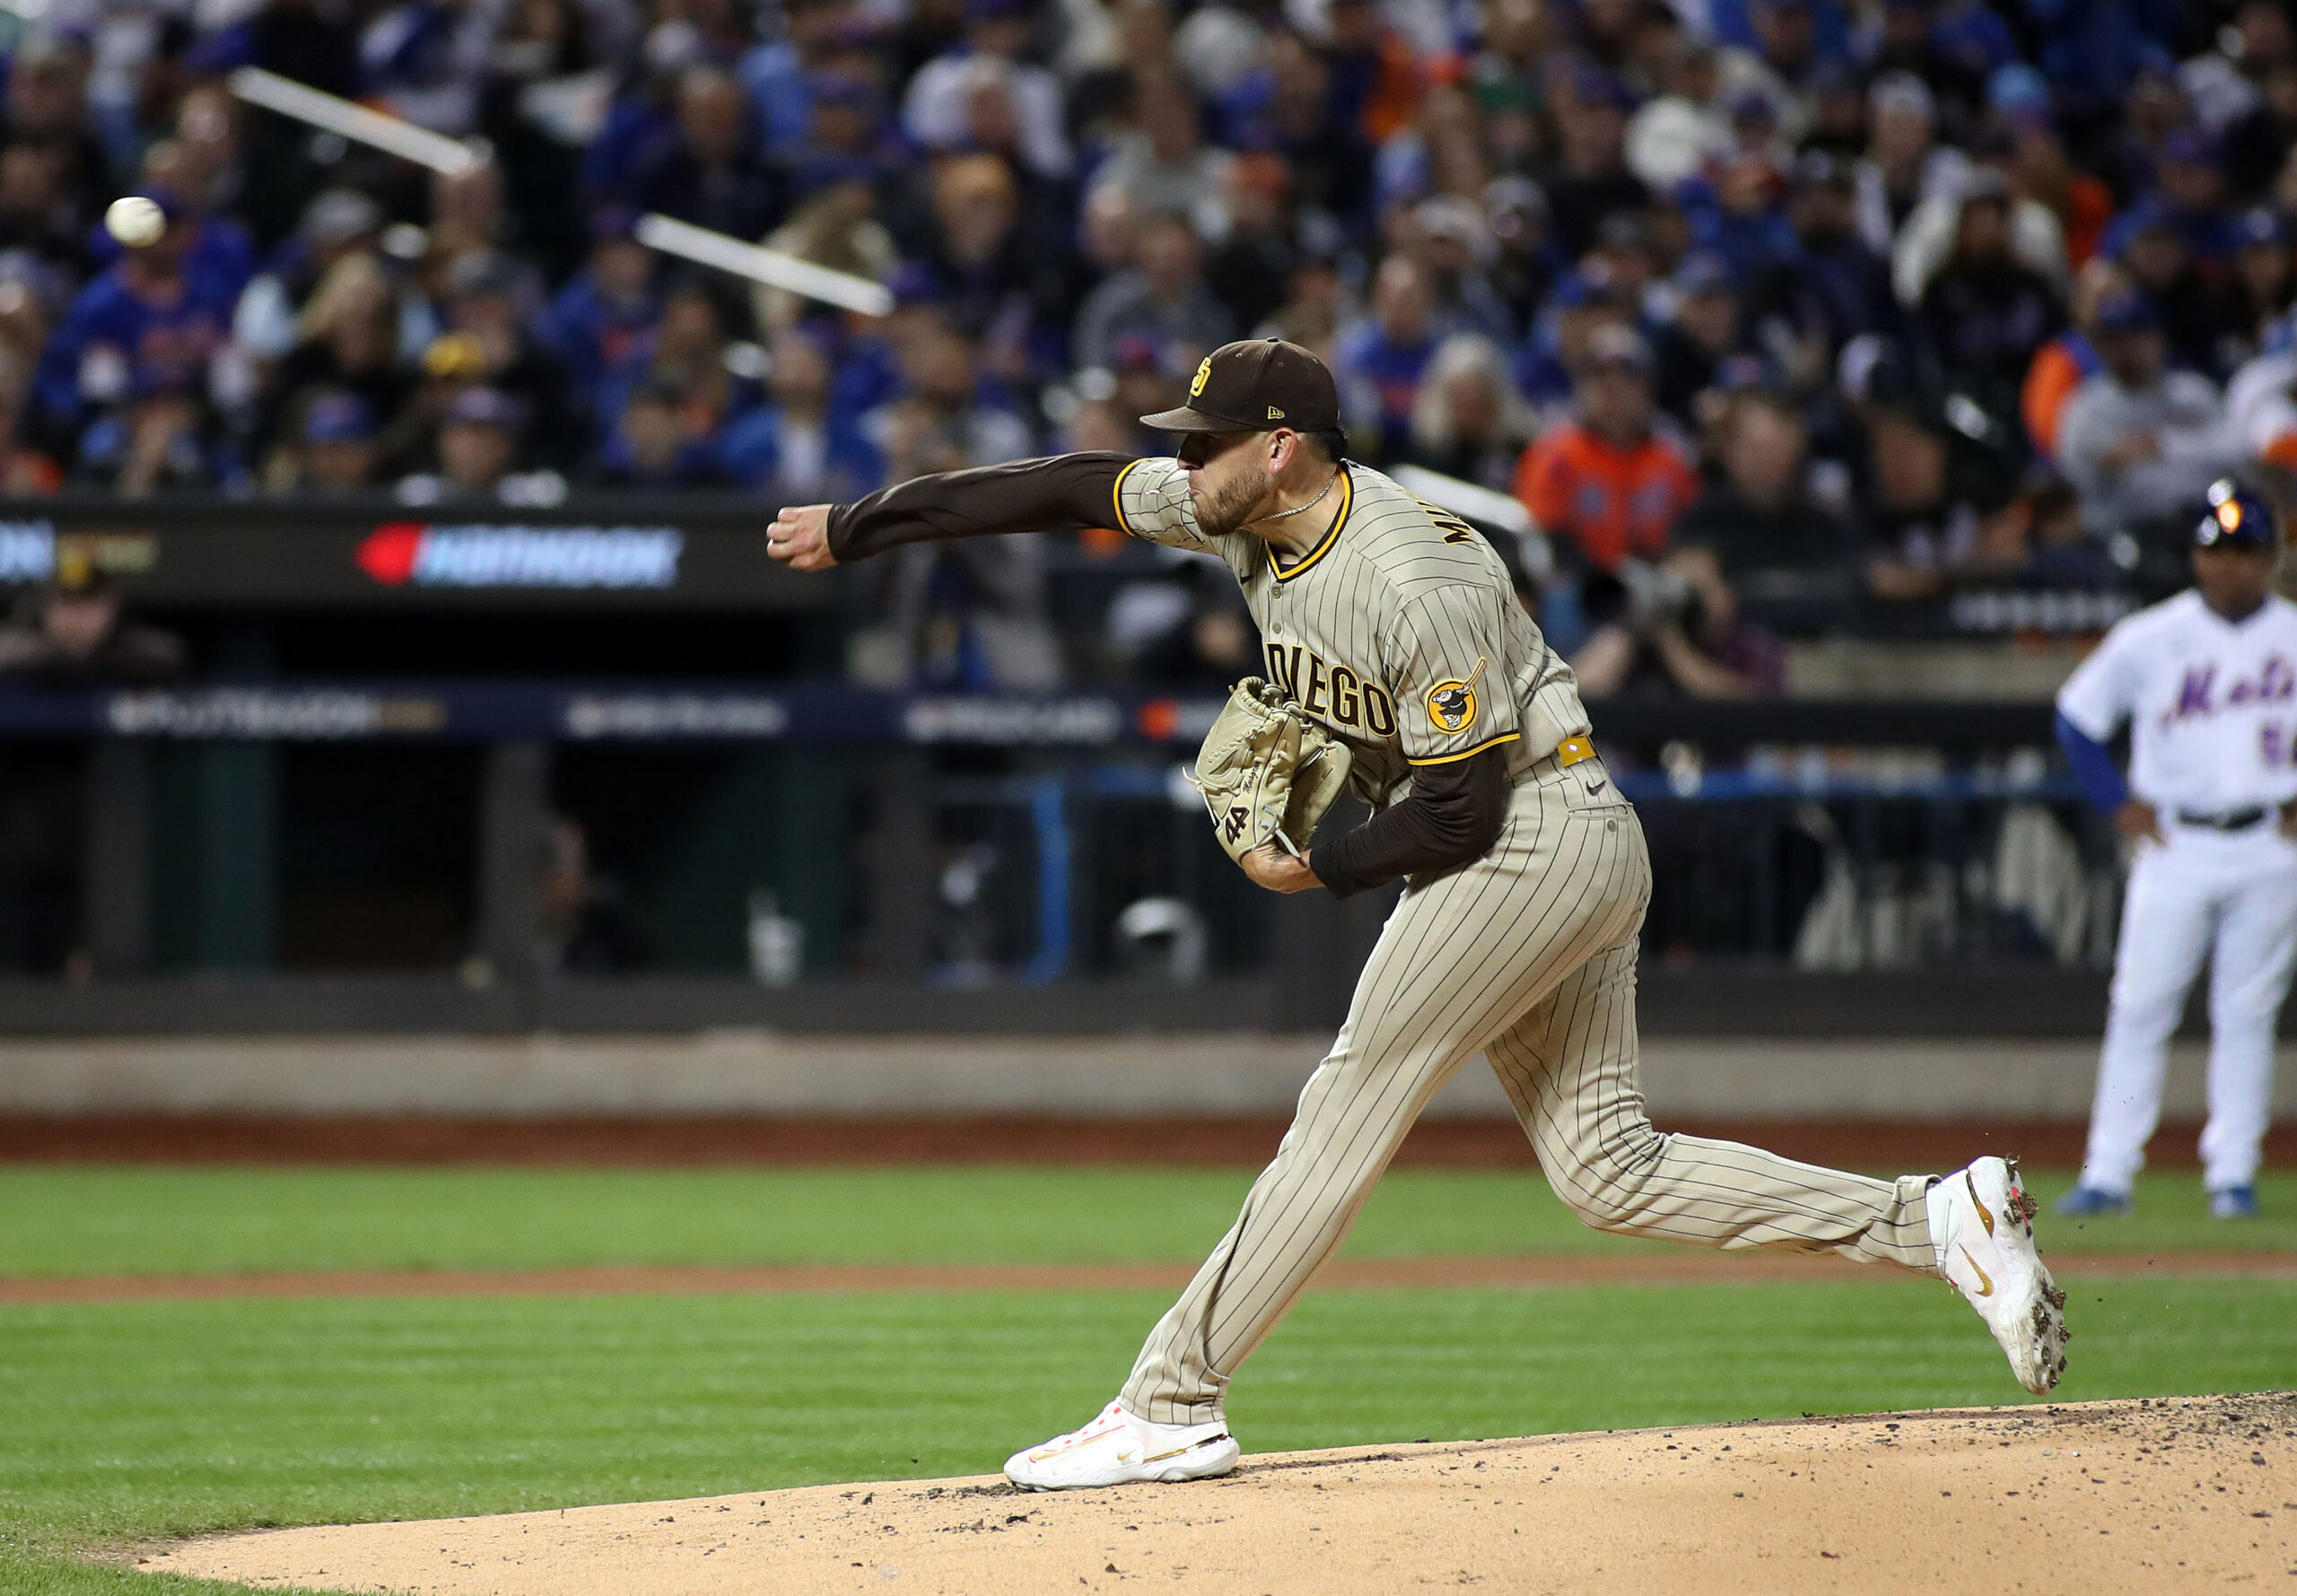 Padres Shutout Mets and Advance to NLDS